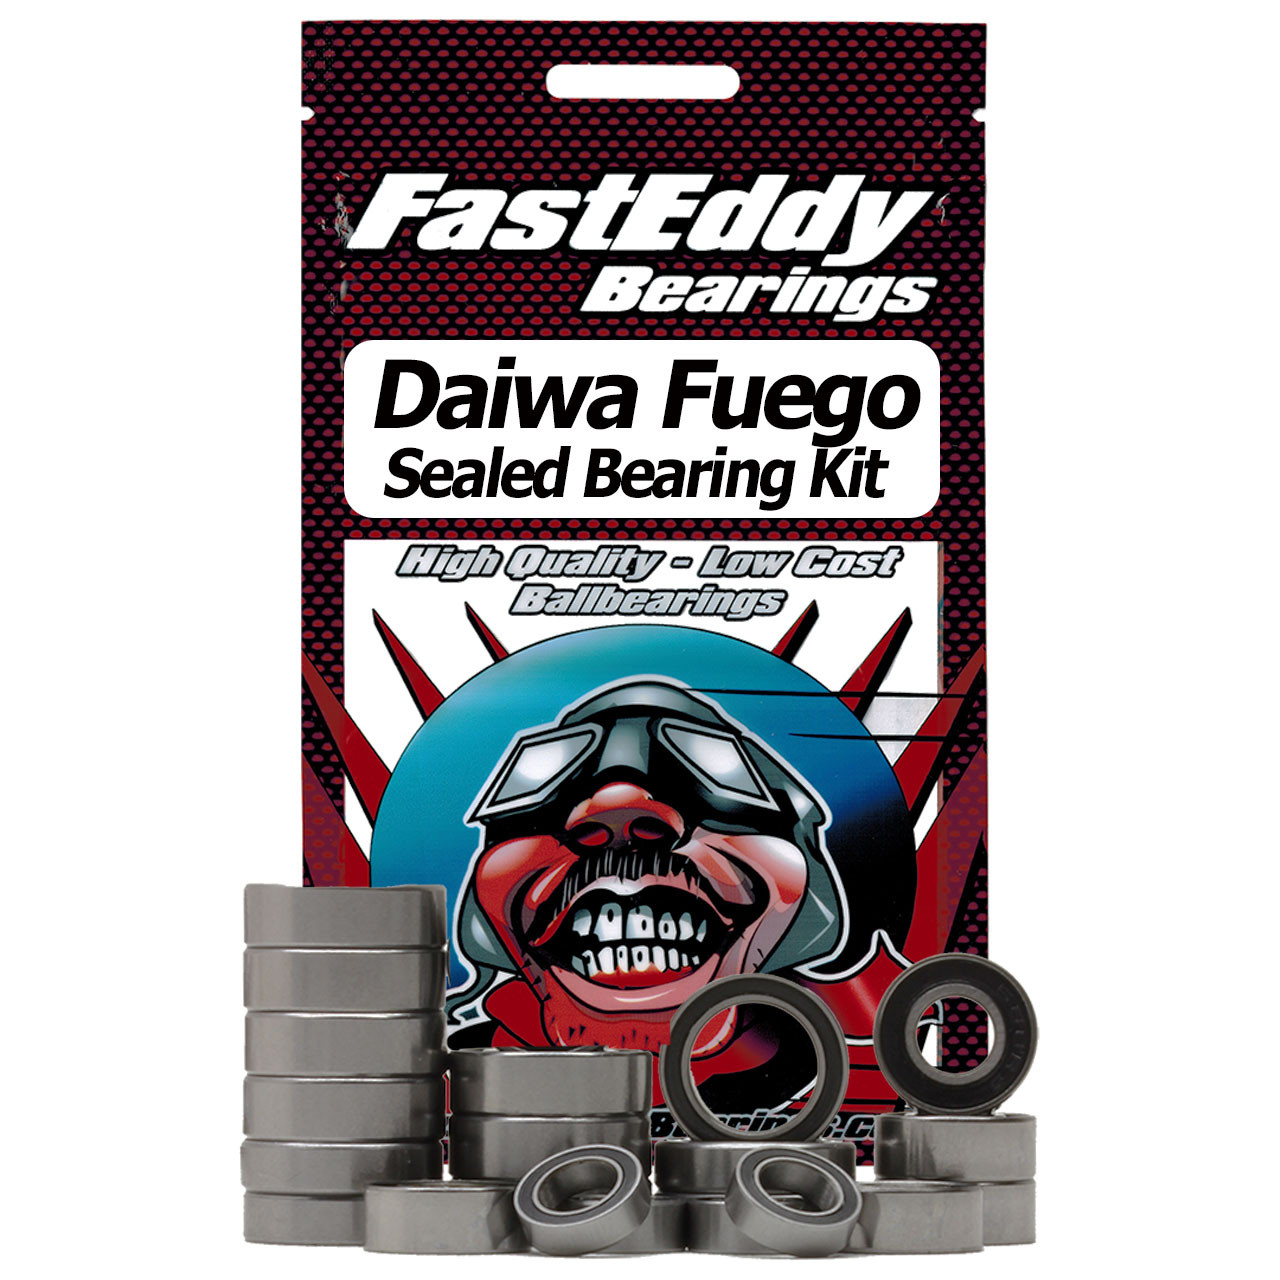 https://cdn11.bigcommerce.com/s-e2cd7/images/stencil/1280x1280/products/3033/4304/Daiwa_Fuego_Complete_Baitcaster_Fishing_Reel_Rubber_Sealed_Bearing_Kit__43842.1425008984.jpg?c=2